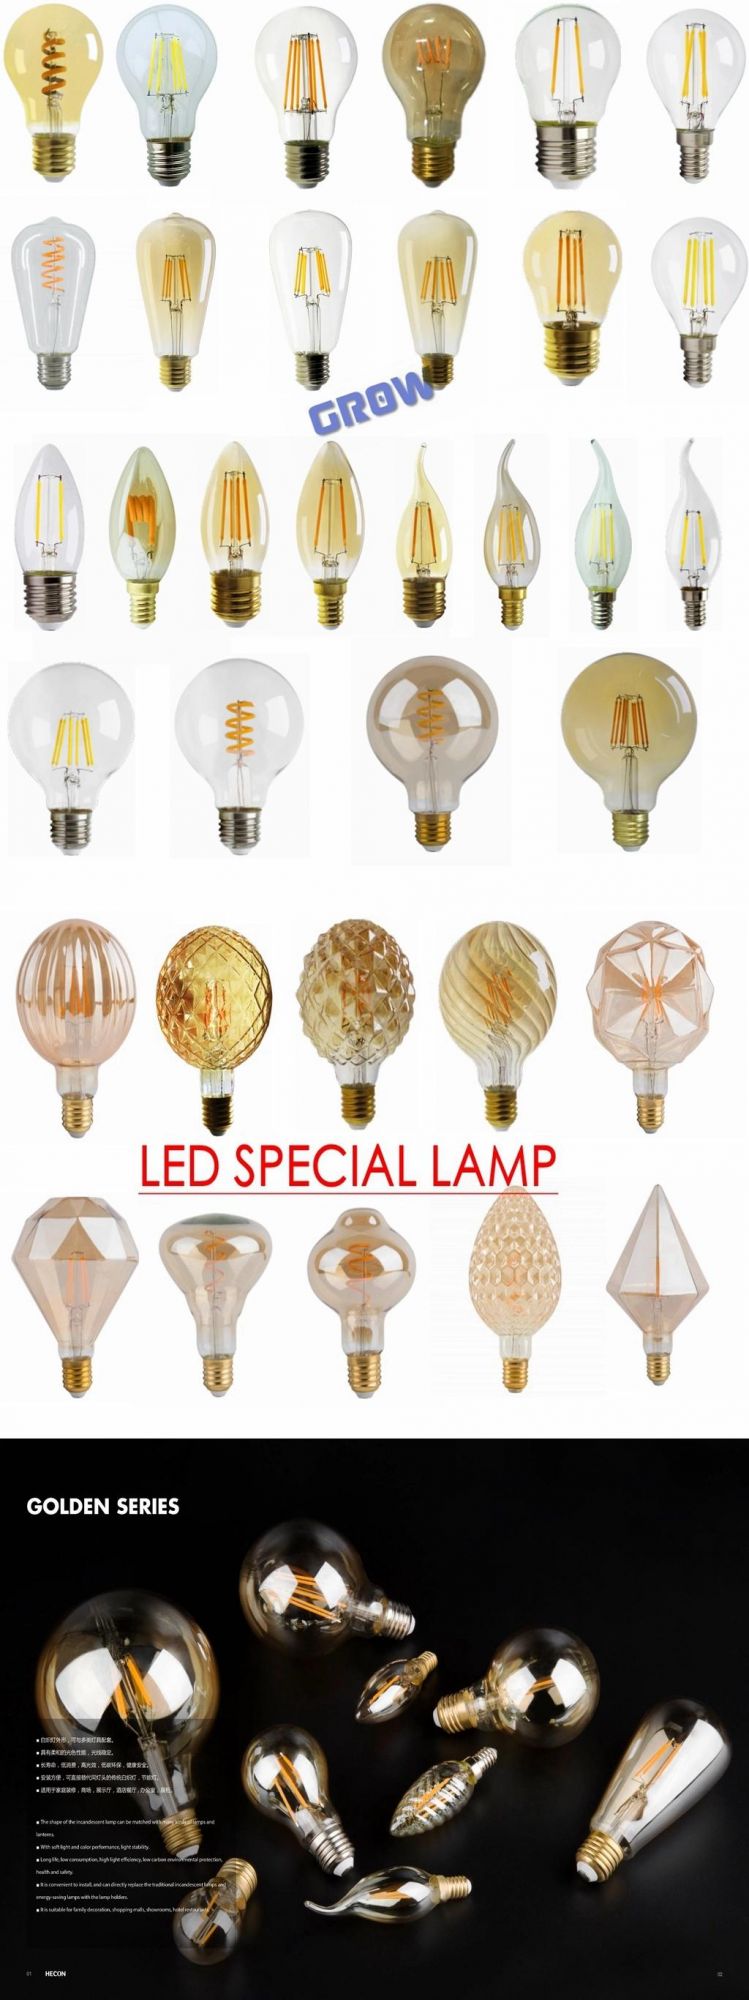 G110 4W Diamond Dome Lamp LED Filament Lamp for Indoor Decorative Bulb